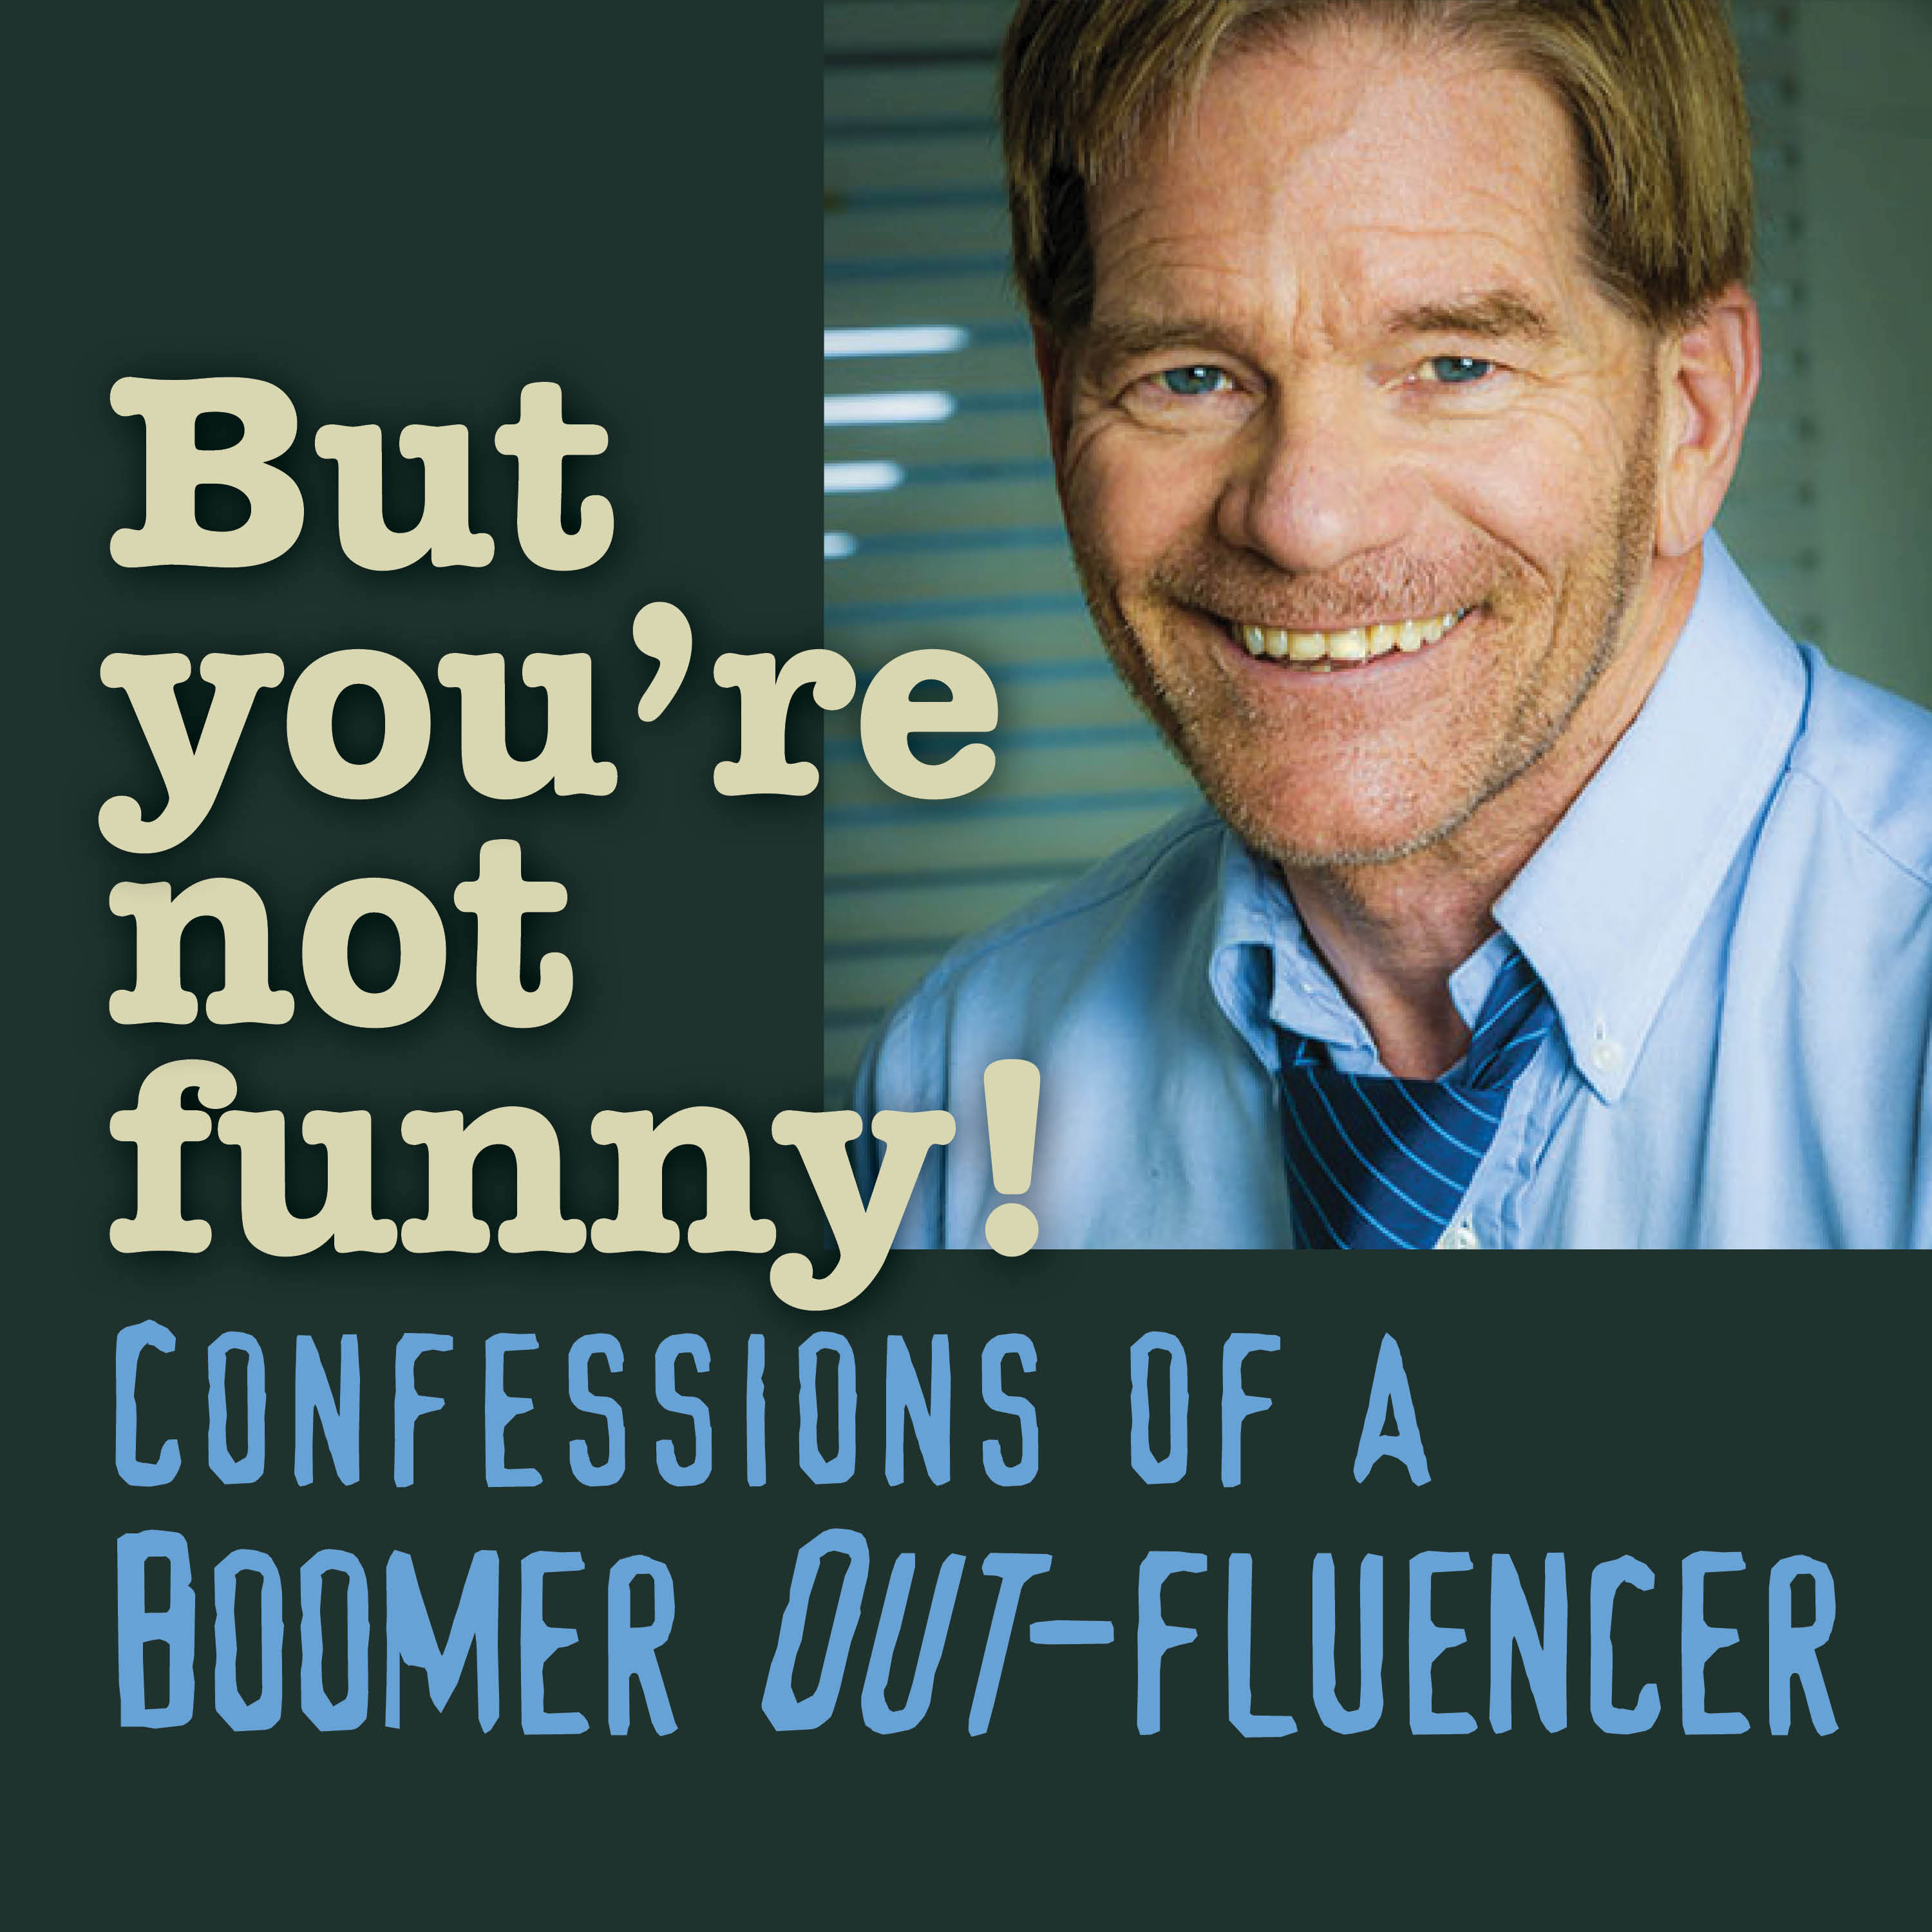 BUT YOU'RE NOT FUNNY! Confessions of a Boomer Out-fluencer